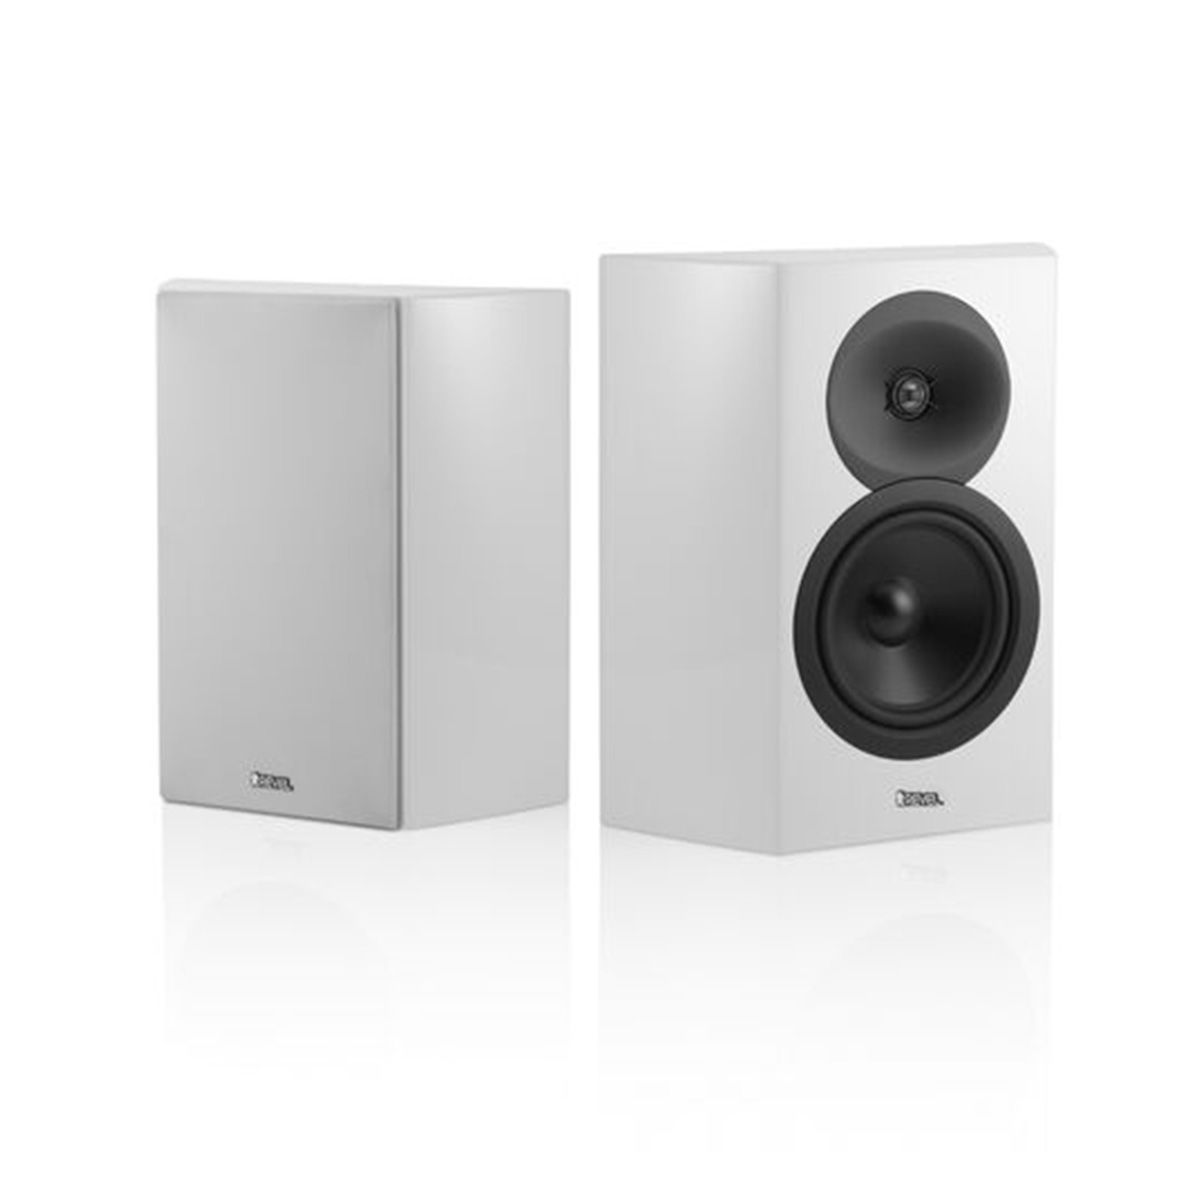 Revel Concerta2 S16 On-Wall Loudspeaker - white pair - angled front views, with grille, and without grille